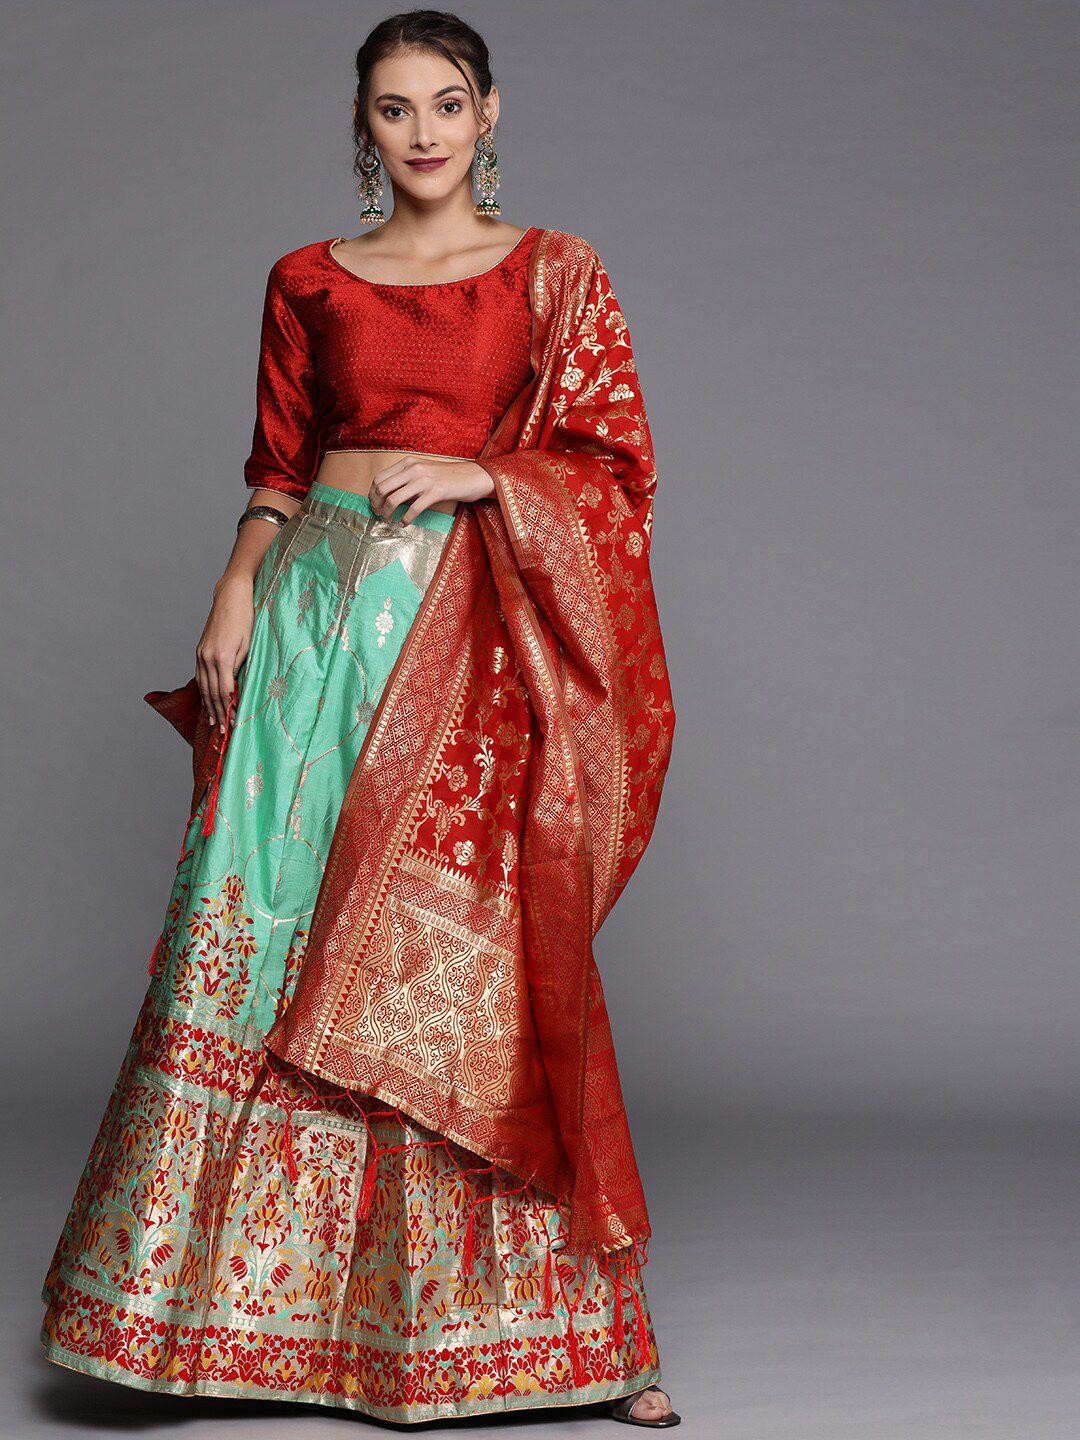 MANVAA Green & Red Semi-Stitched Lehenga & Unstitched Blouse With Dupatta